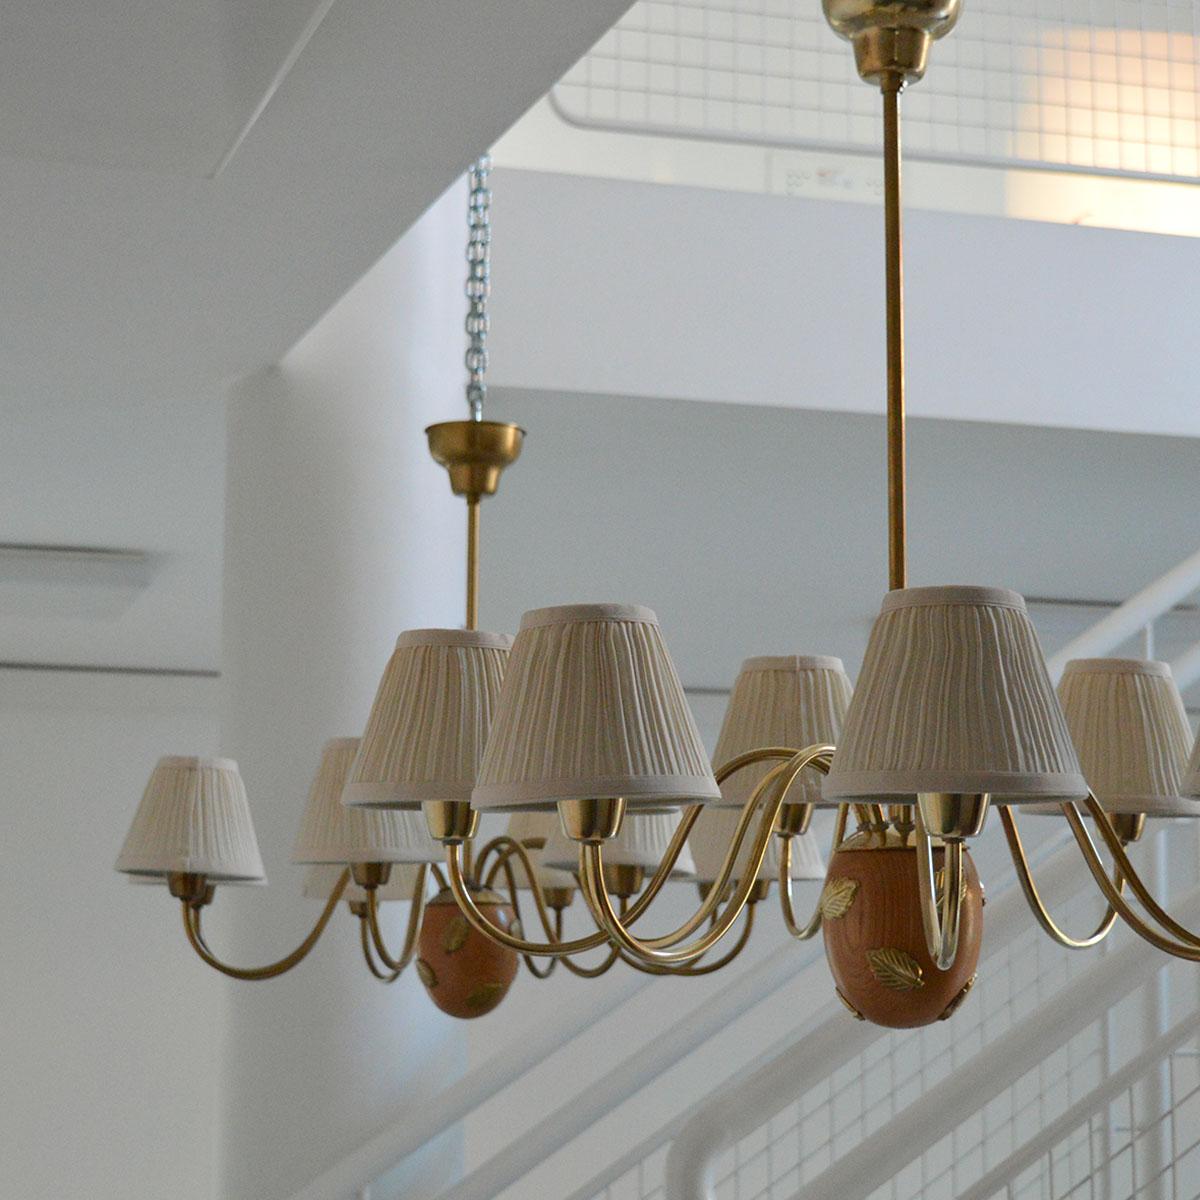 Large 8-arm chandelier in brass and wood, model 10/8, designed by Hans Bergström and produced by Ateljé Lyktan in Sweden, 1940s.

Designed by the Swedish architect and designer Hans Bergström, this chandelier features eight curved brass arms and a